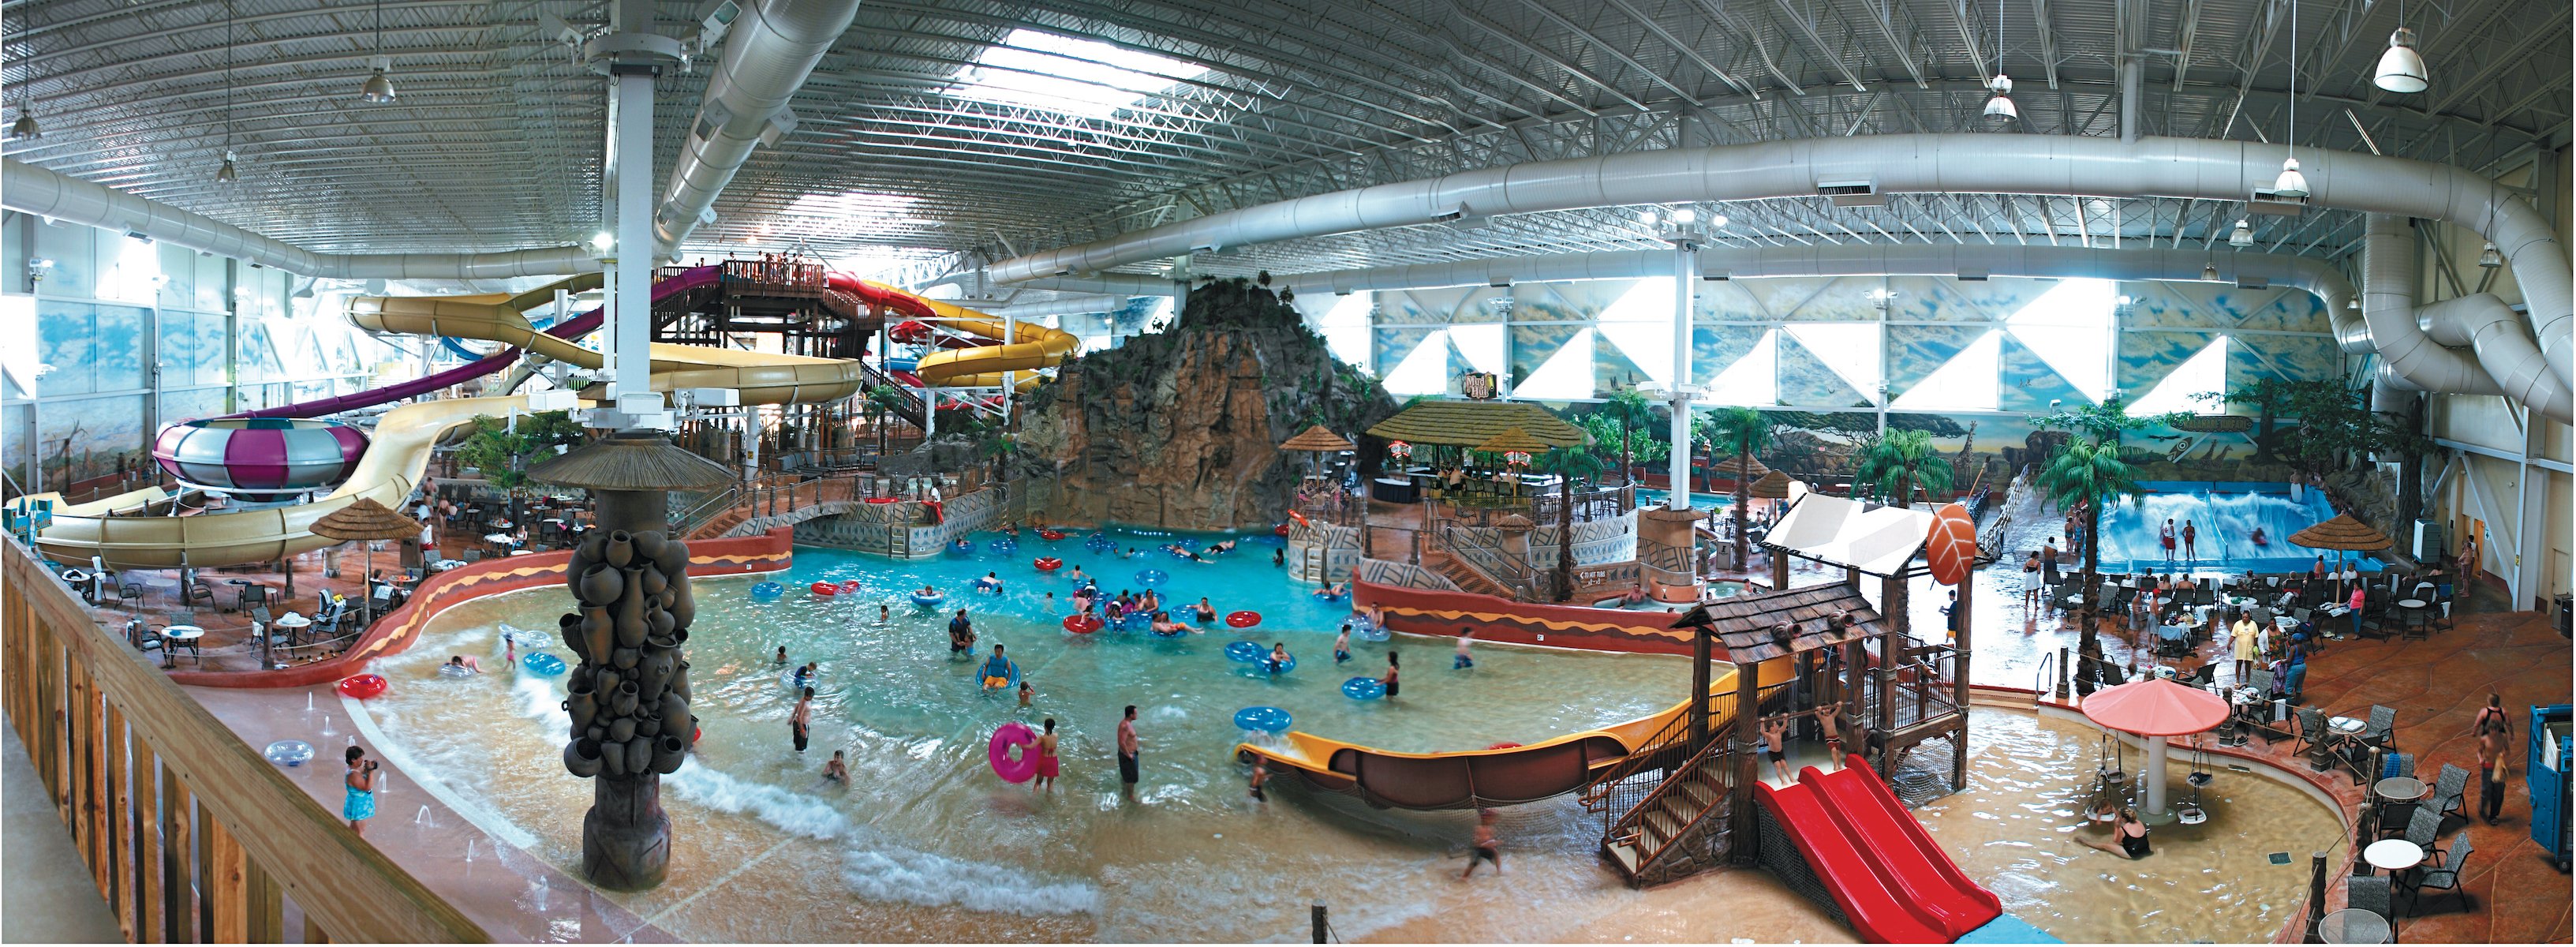 Kalahari Resorts and Conventions partners with IDeaS 